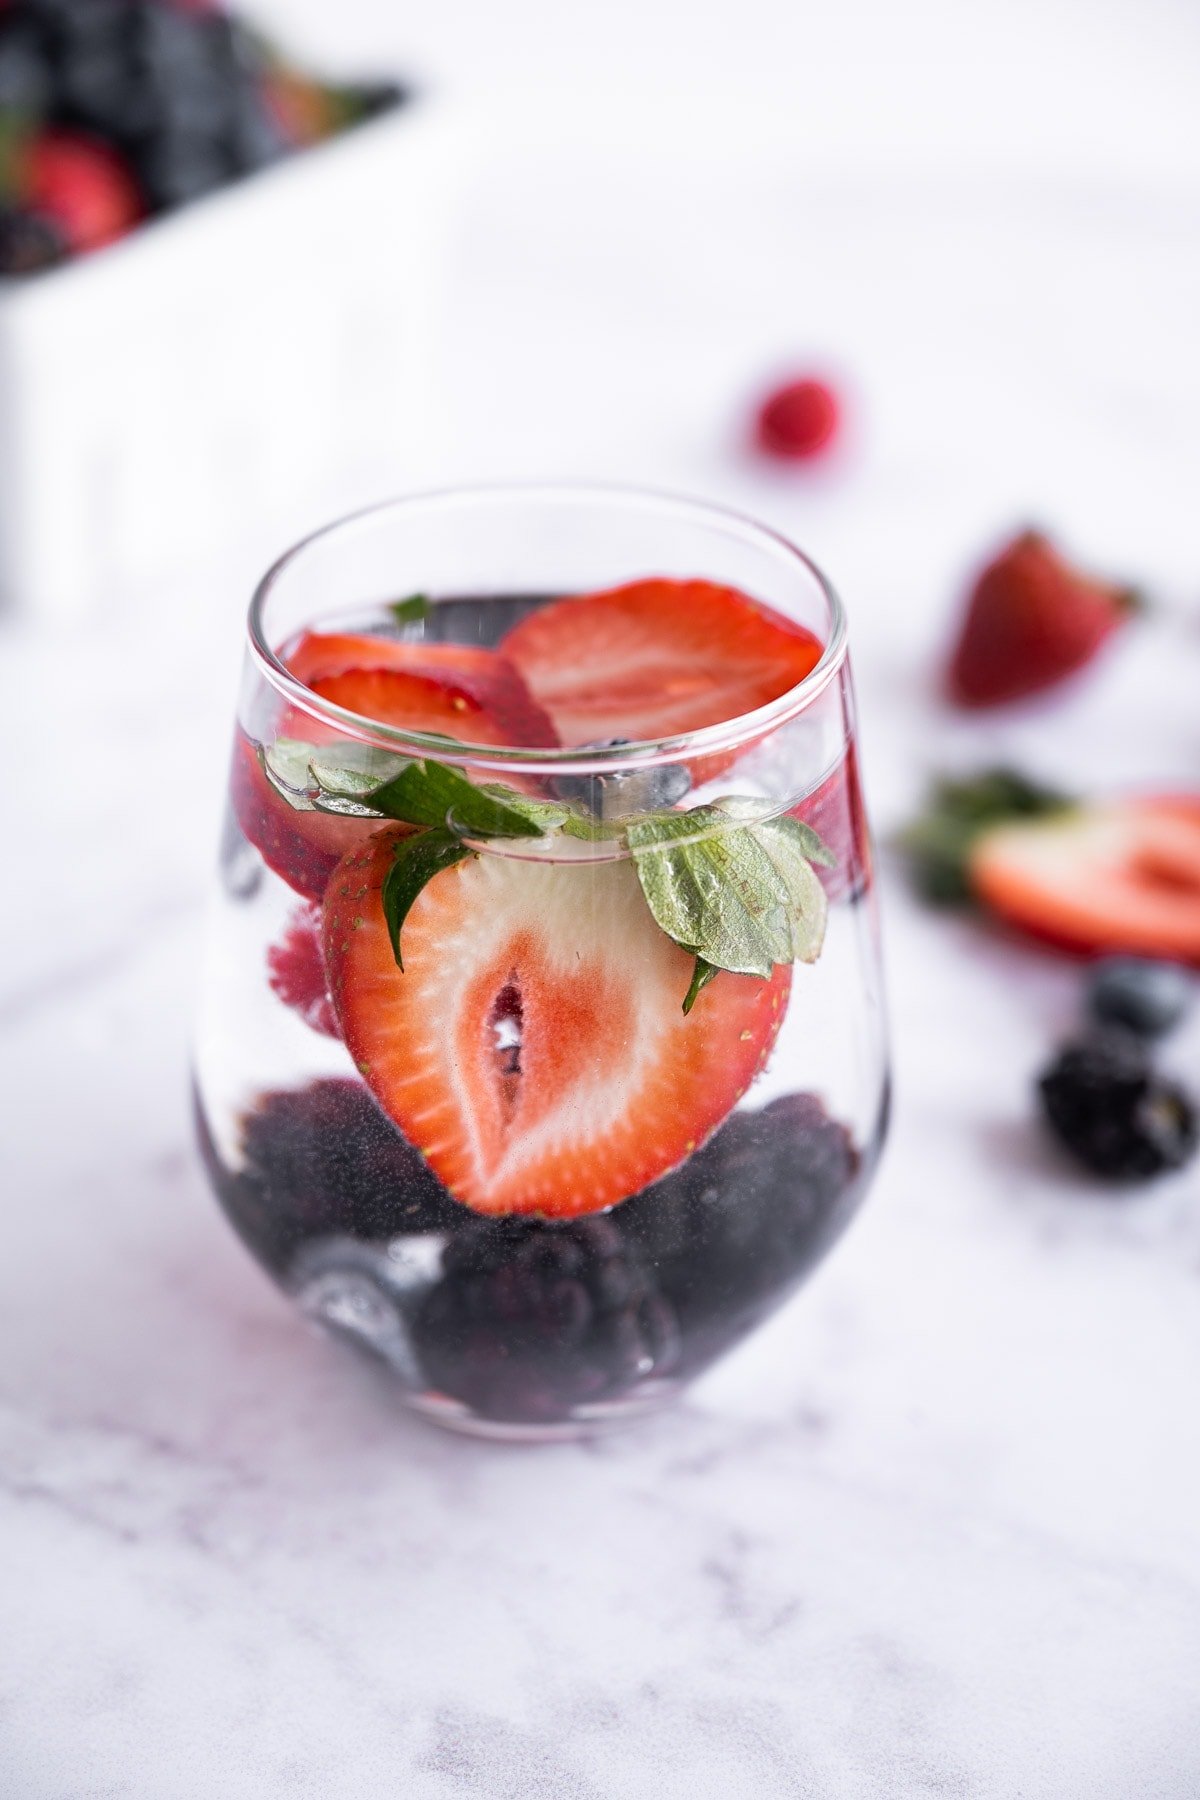 Strawberries, blueberries, and blackberries in a glass with water.